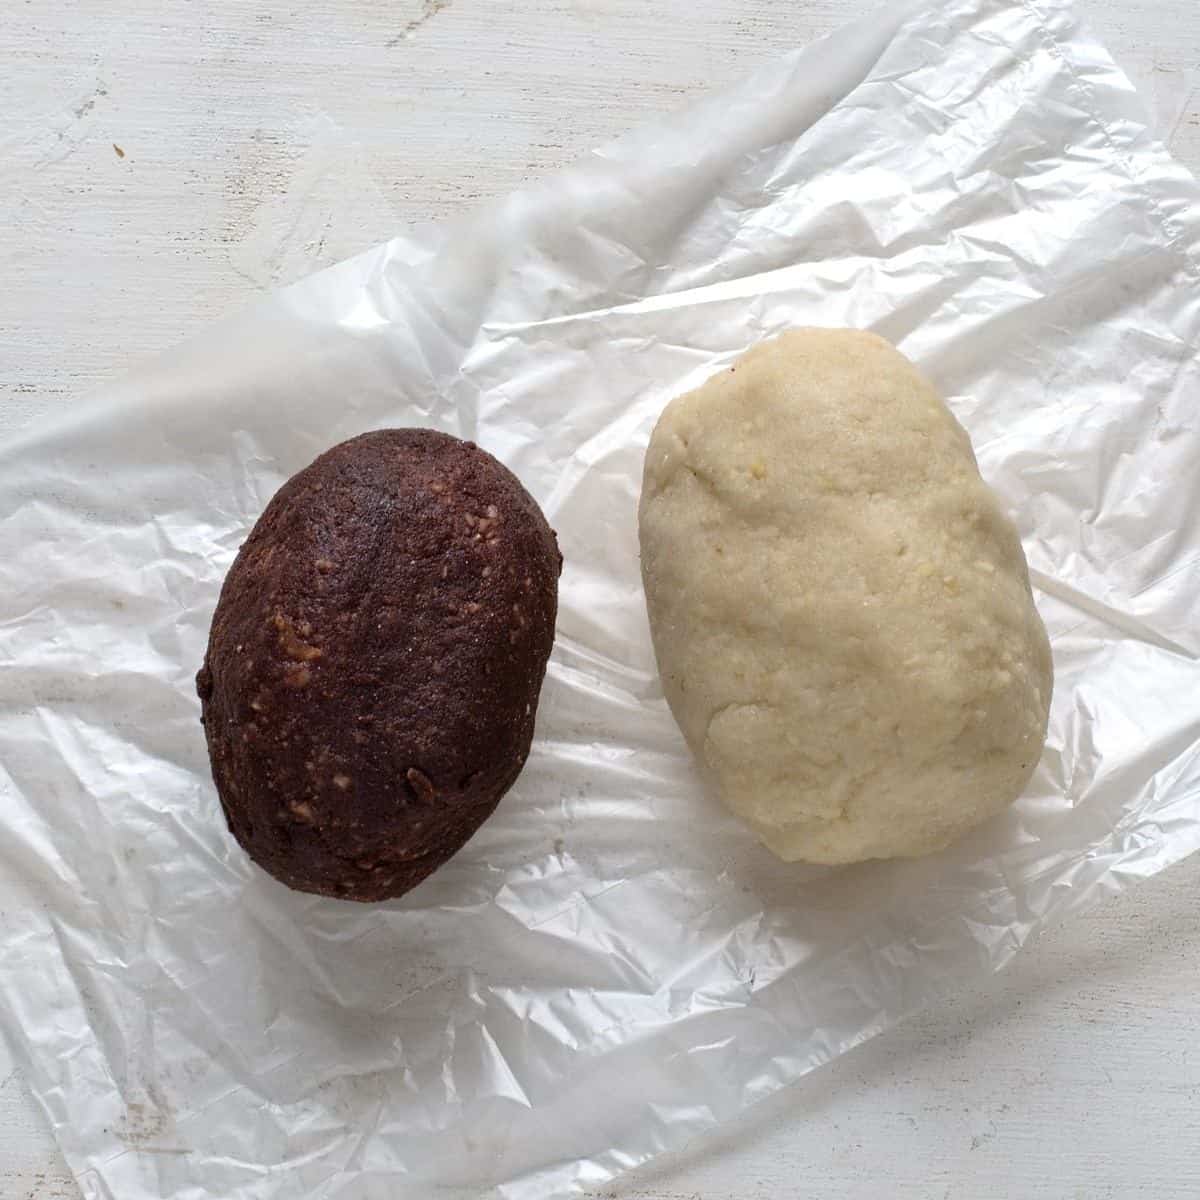 Marzipan dough, left cocoa colored and a white part on the right.